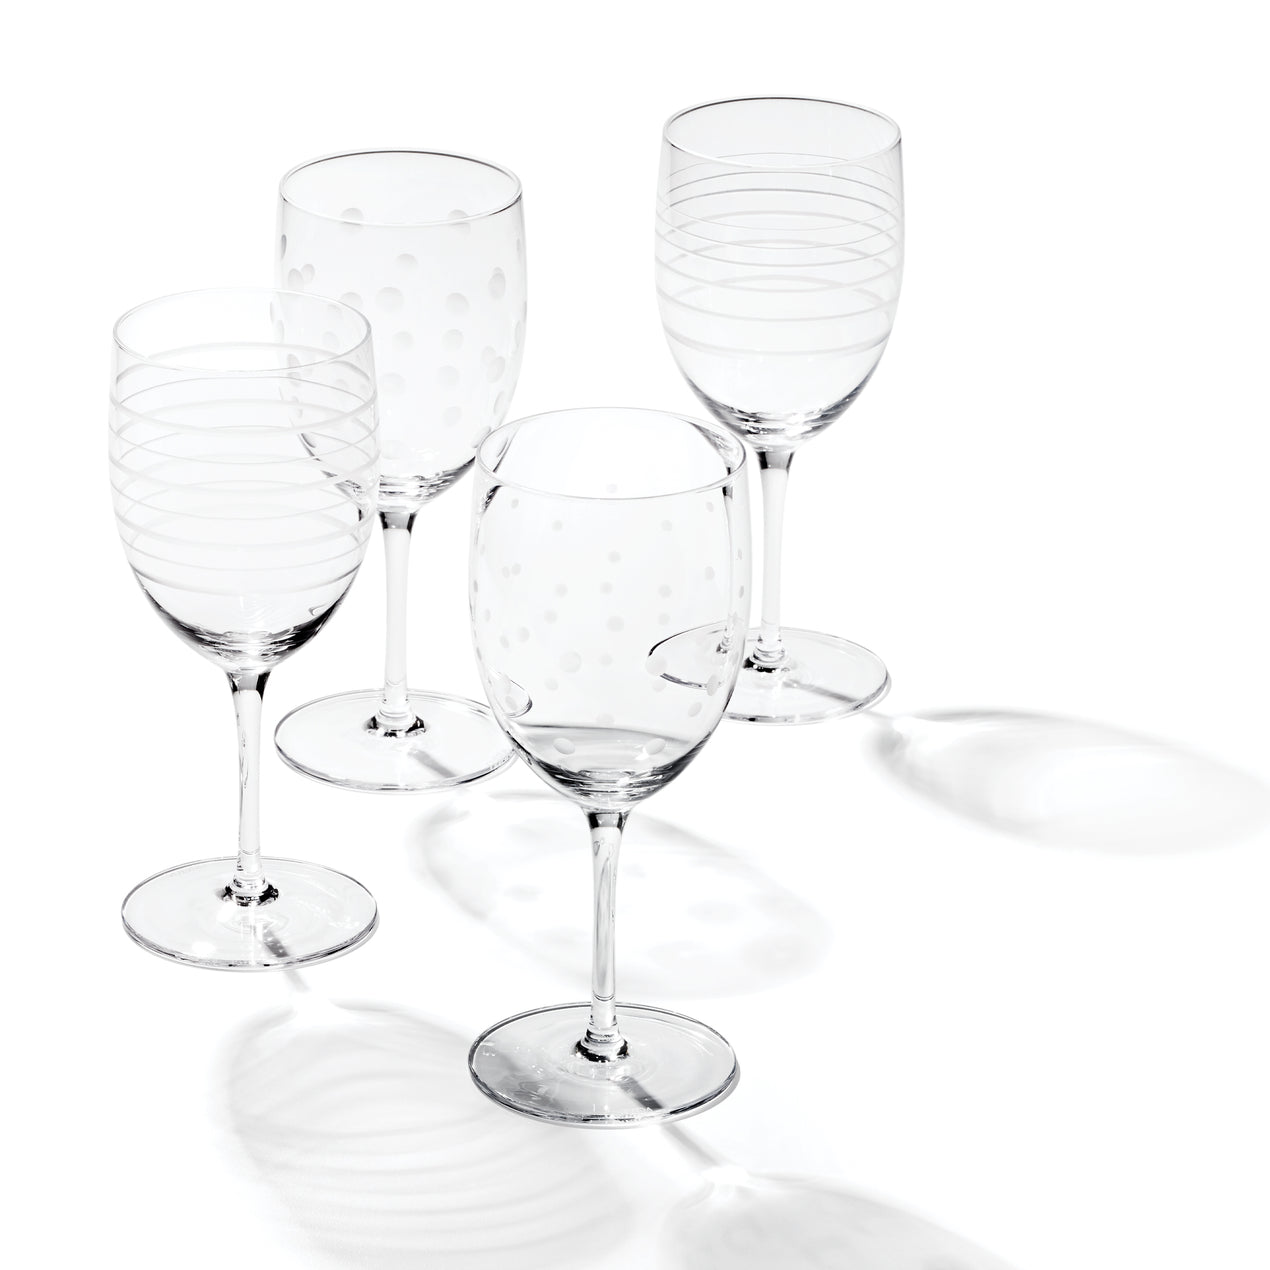 Mikasa Party Set Of 4 Stemless Martini Glasses, 10 Ounce, Clear